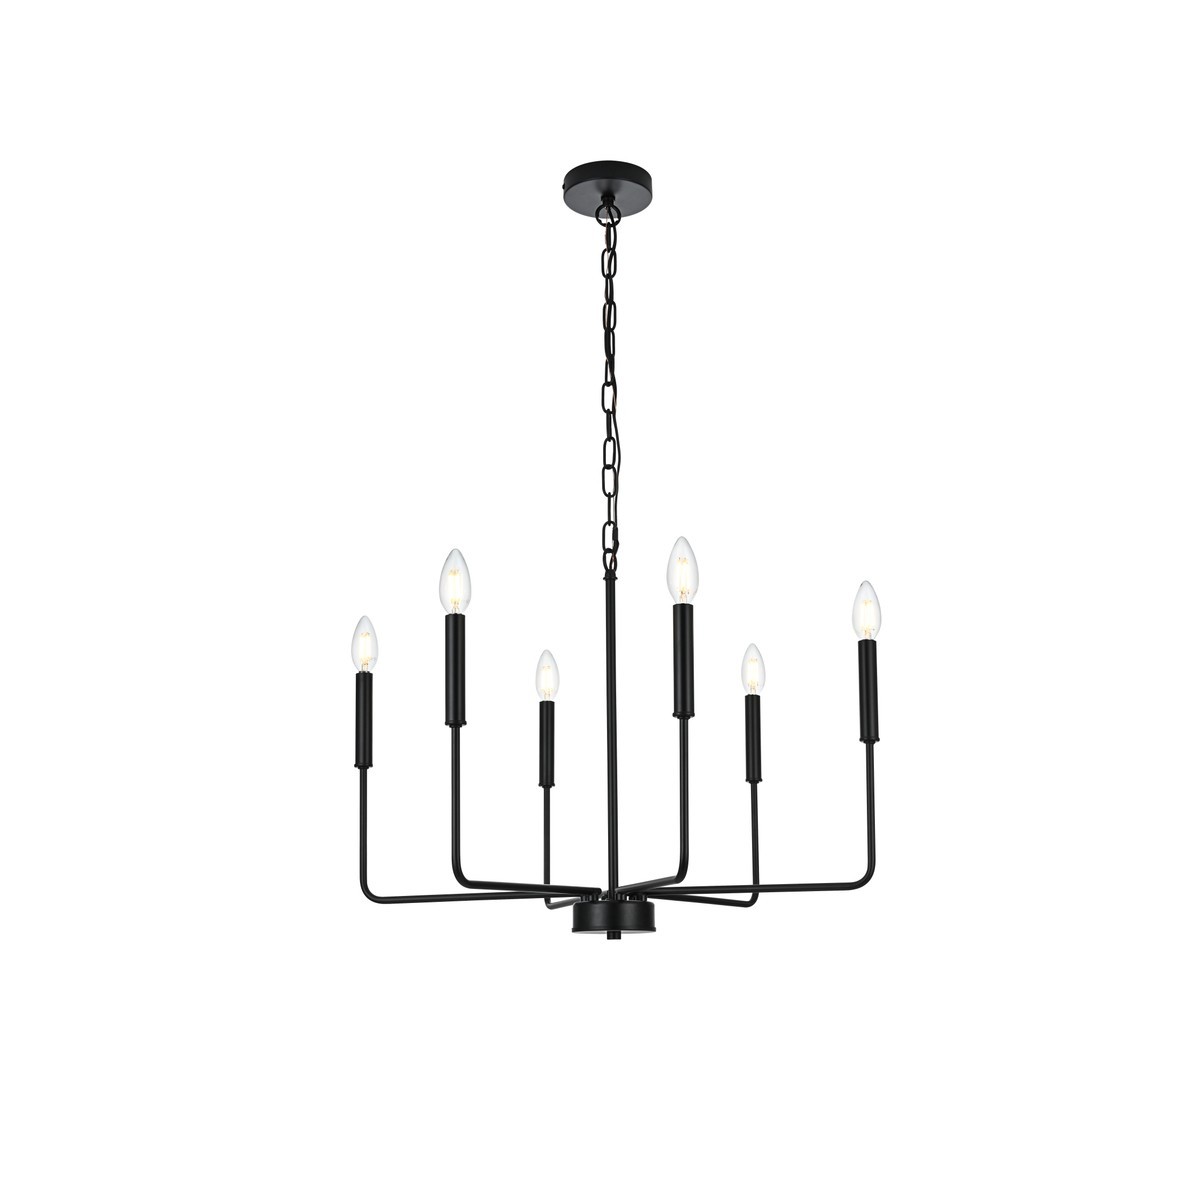 ELEGANT FURNITURE LIGHTING LD740D26 WILLA 26 INCH 6 LIGHT CEILING-MOUNTED PENDANT WITH CHAIN